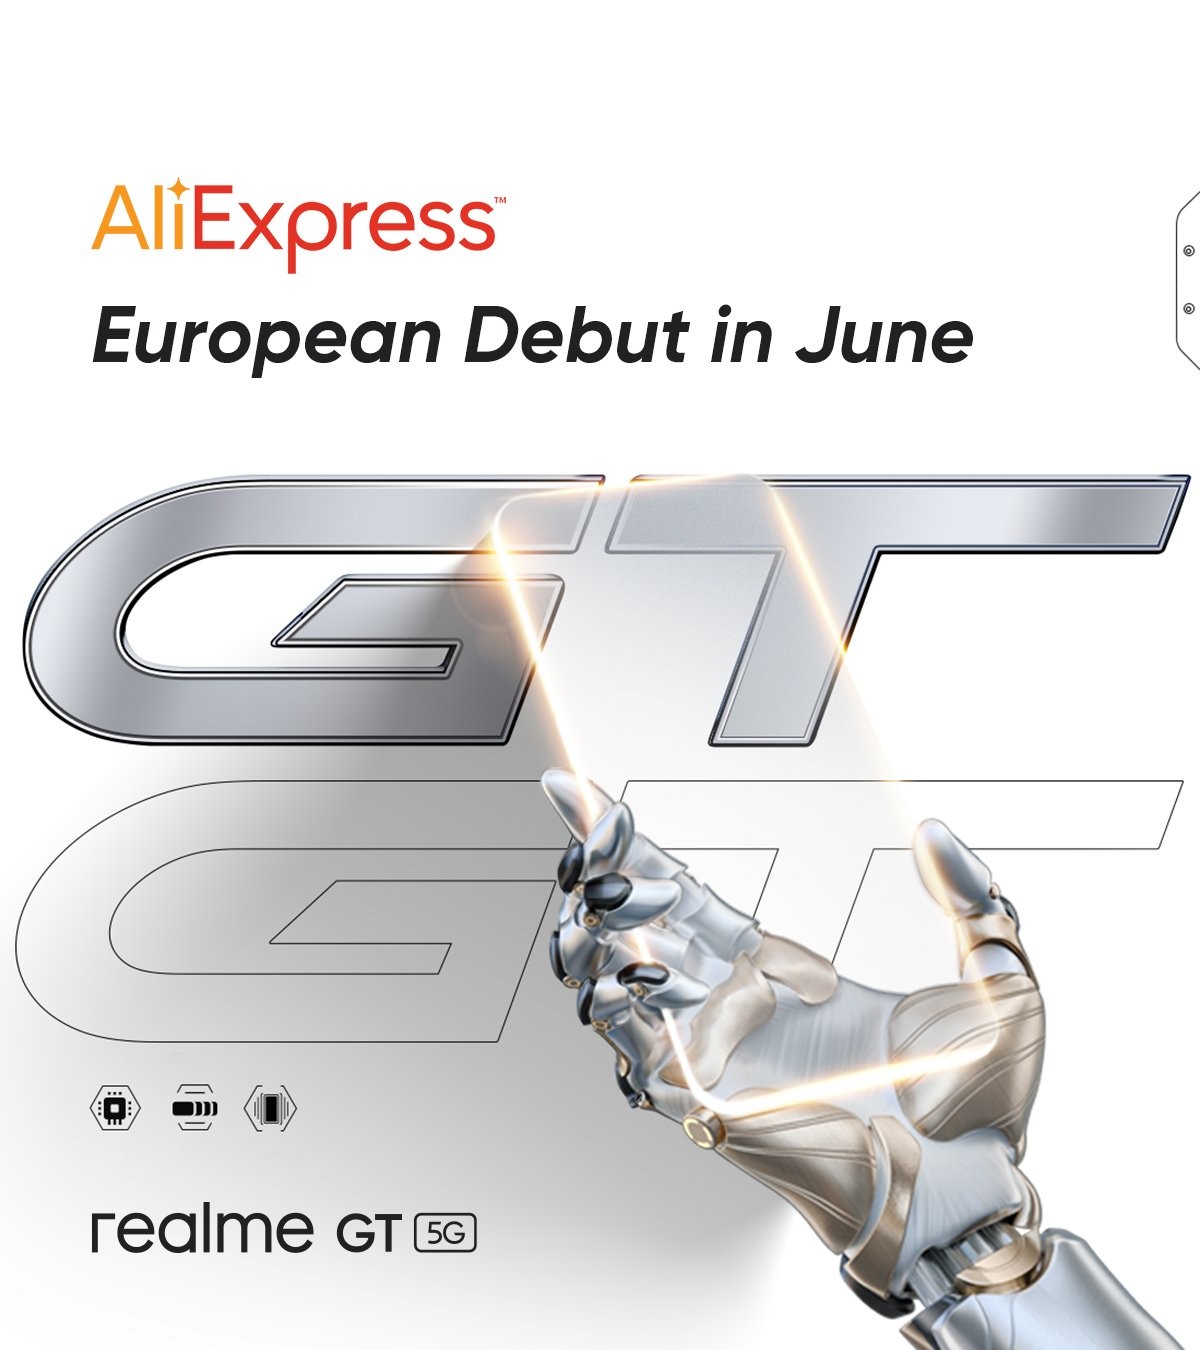 Realme GT 5G launching in June in Europe